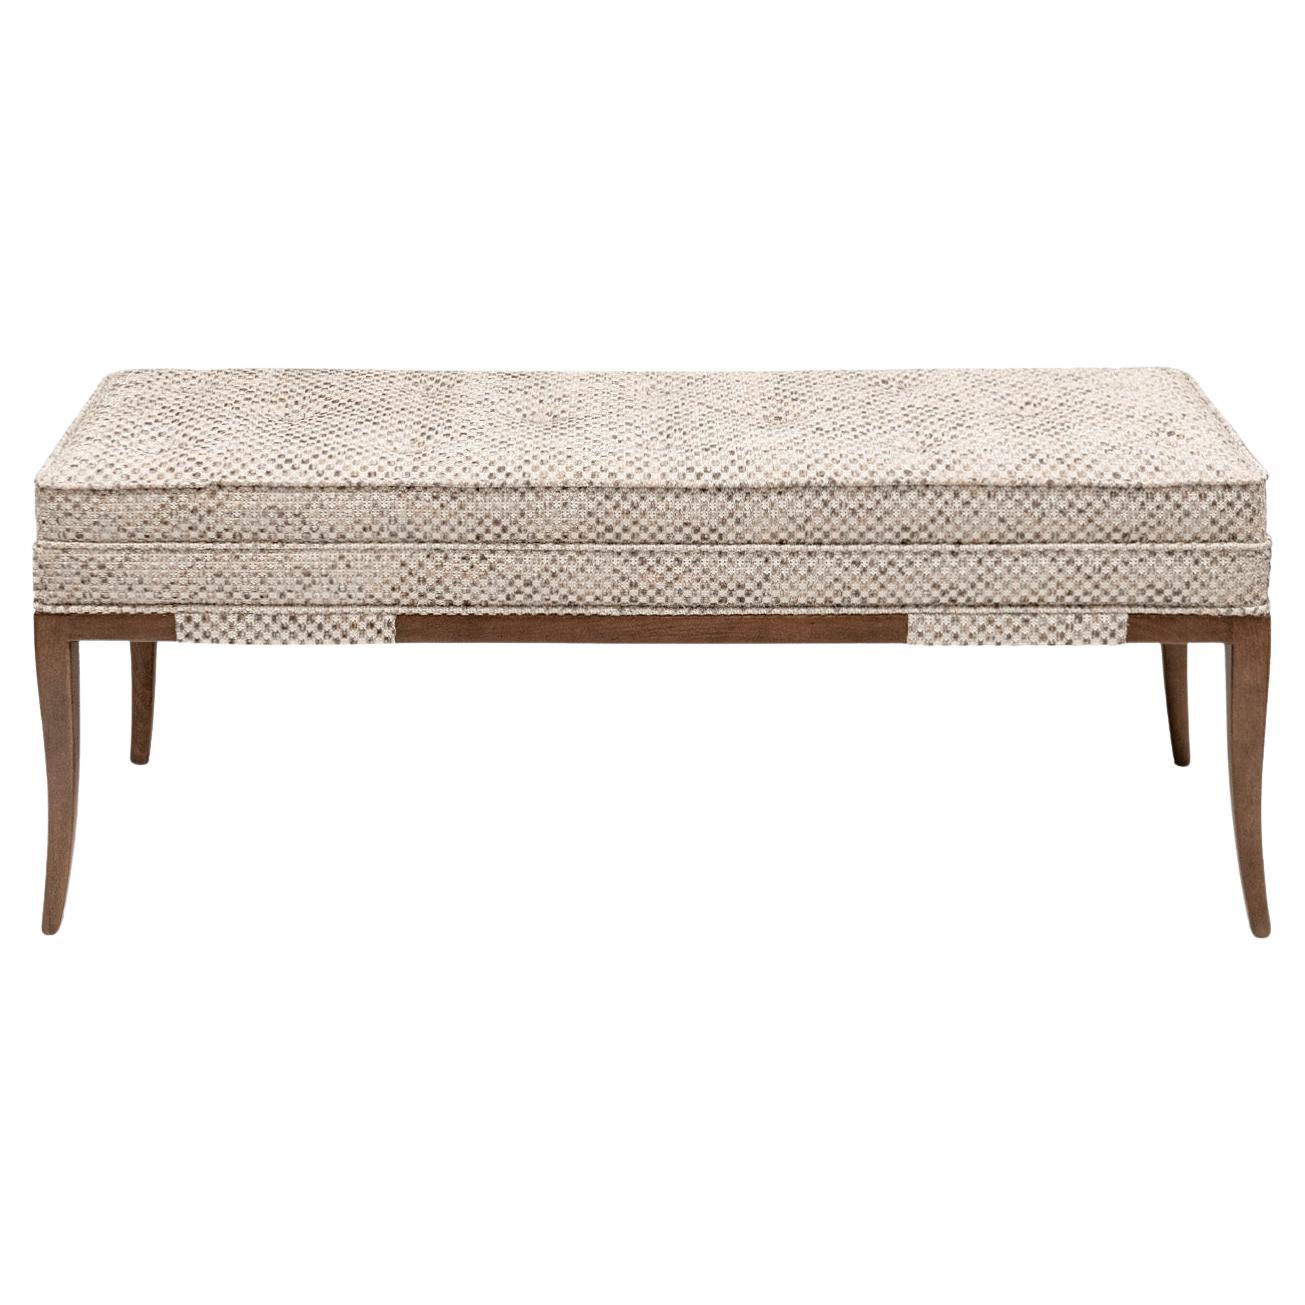 Tommi Parzinger Elegant Upholstered Bench with Tapering Legs 1950s For Sale